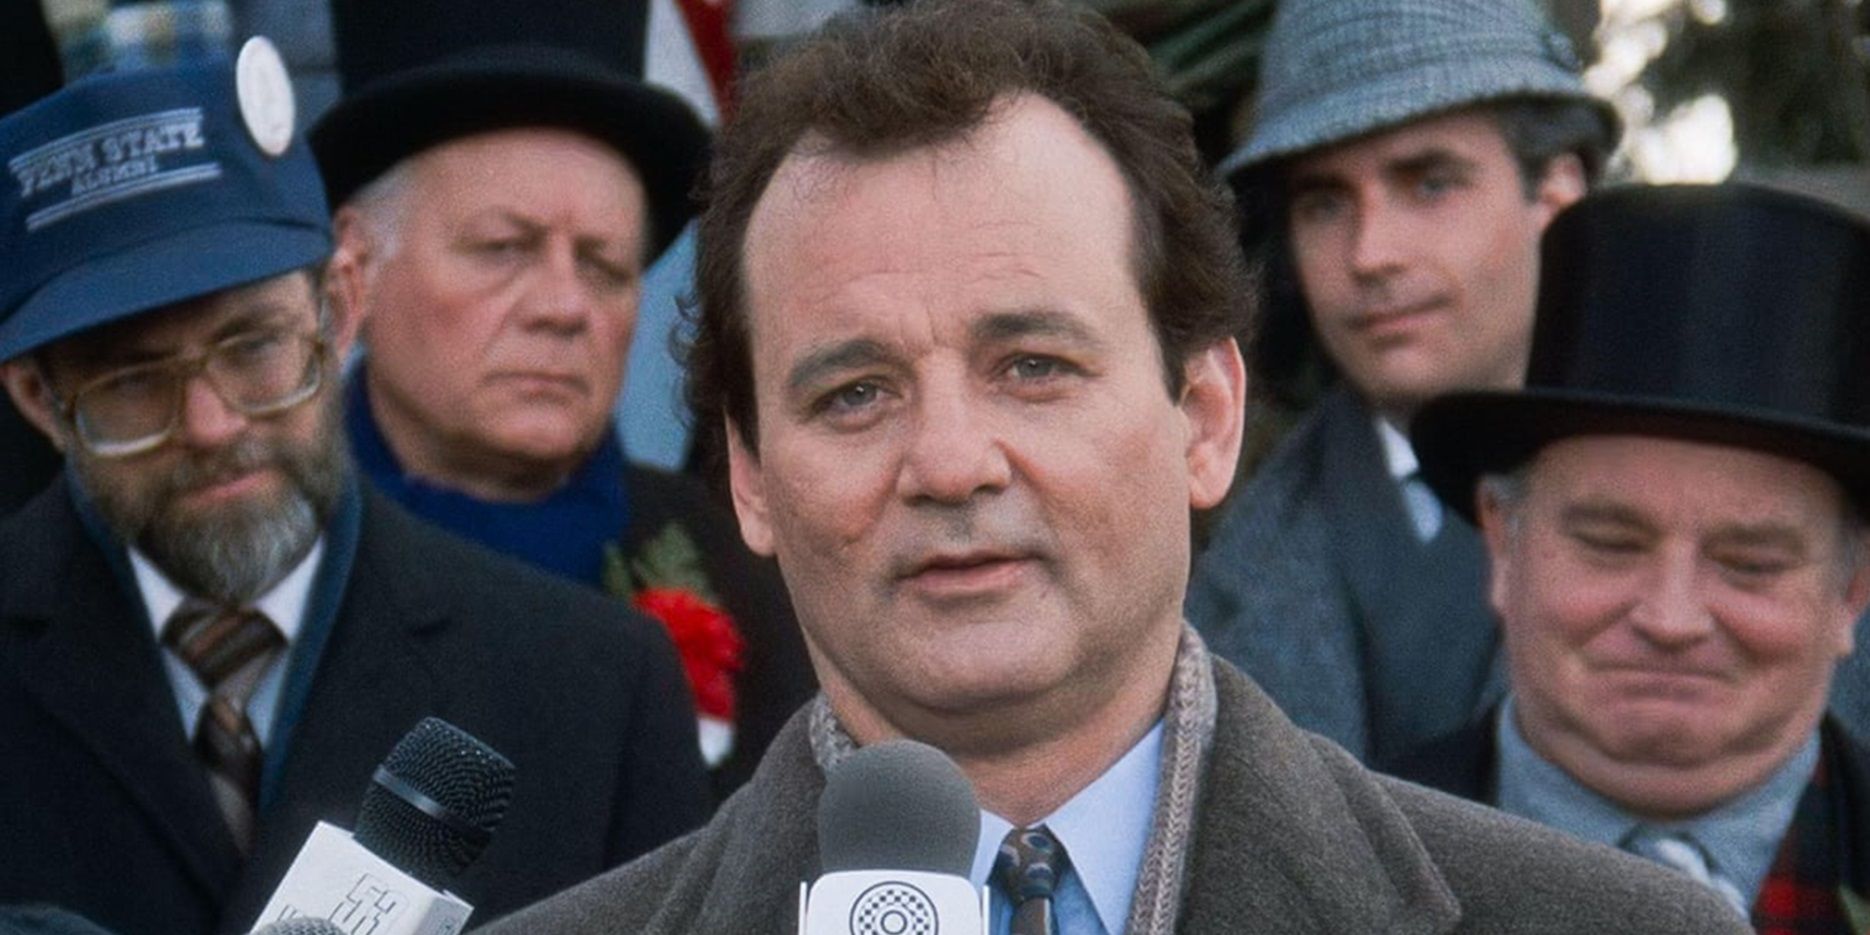 Phil doing a news report in Groundhog Day